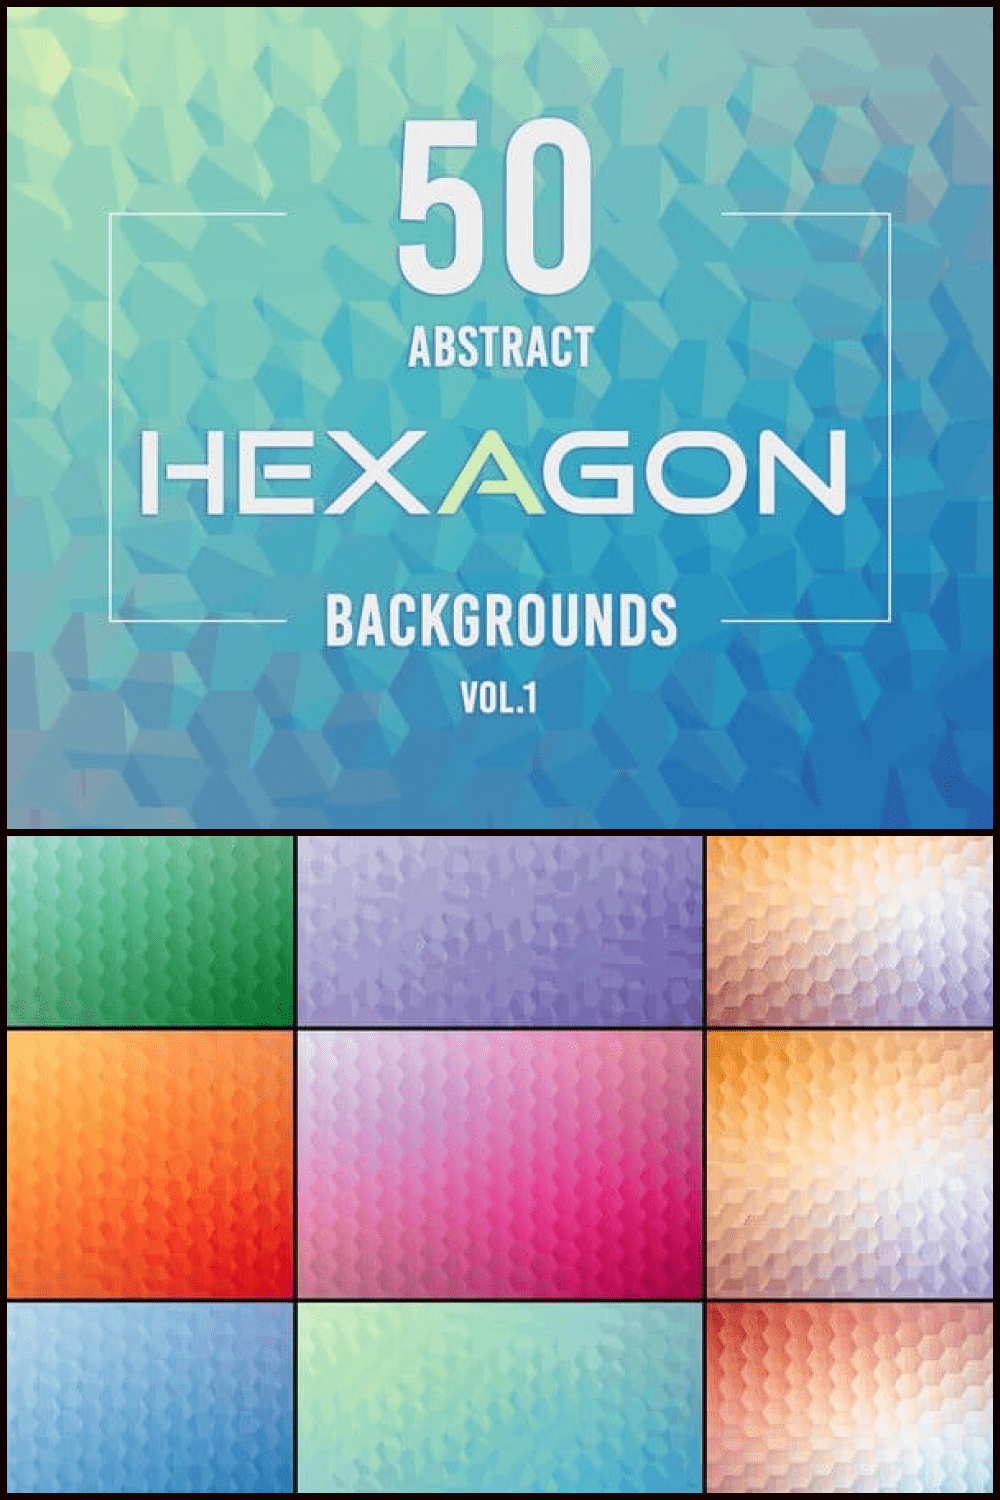 139 50 Abstract Hexagon Backgrounds – Vol. 1